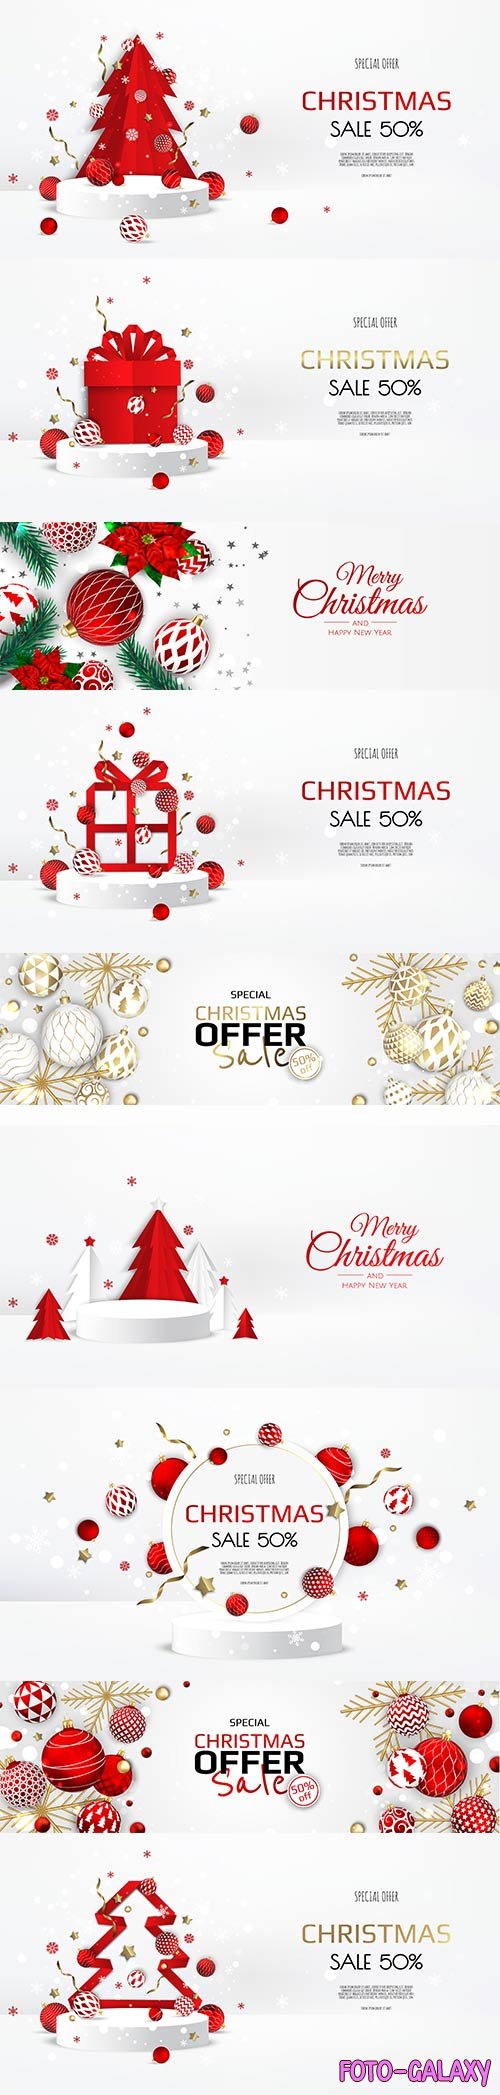 Christmas vector illustration with Christmas trees balls and decorative elements on a white background